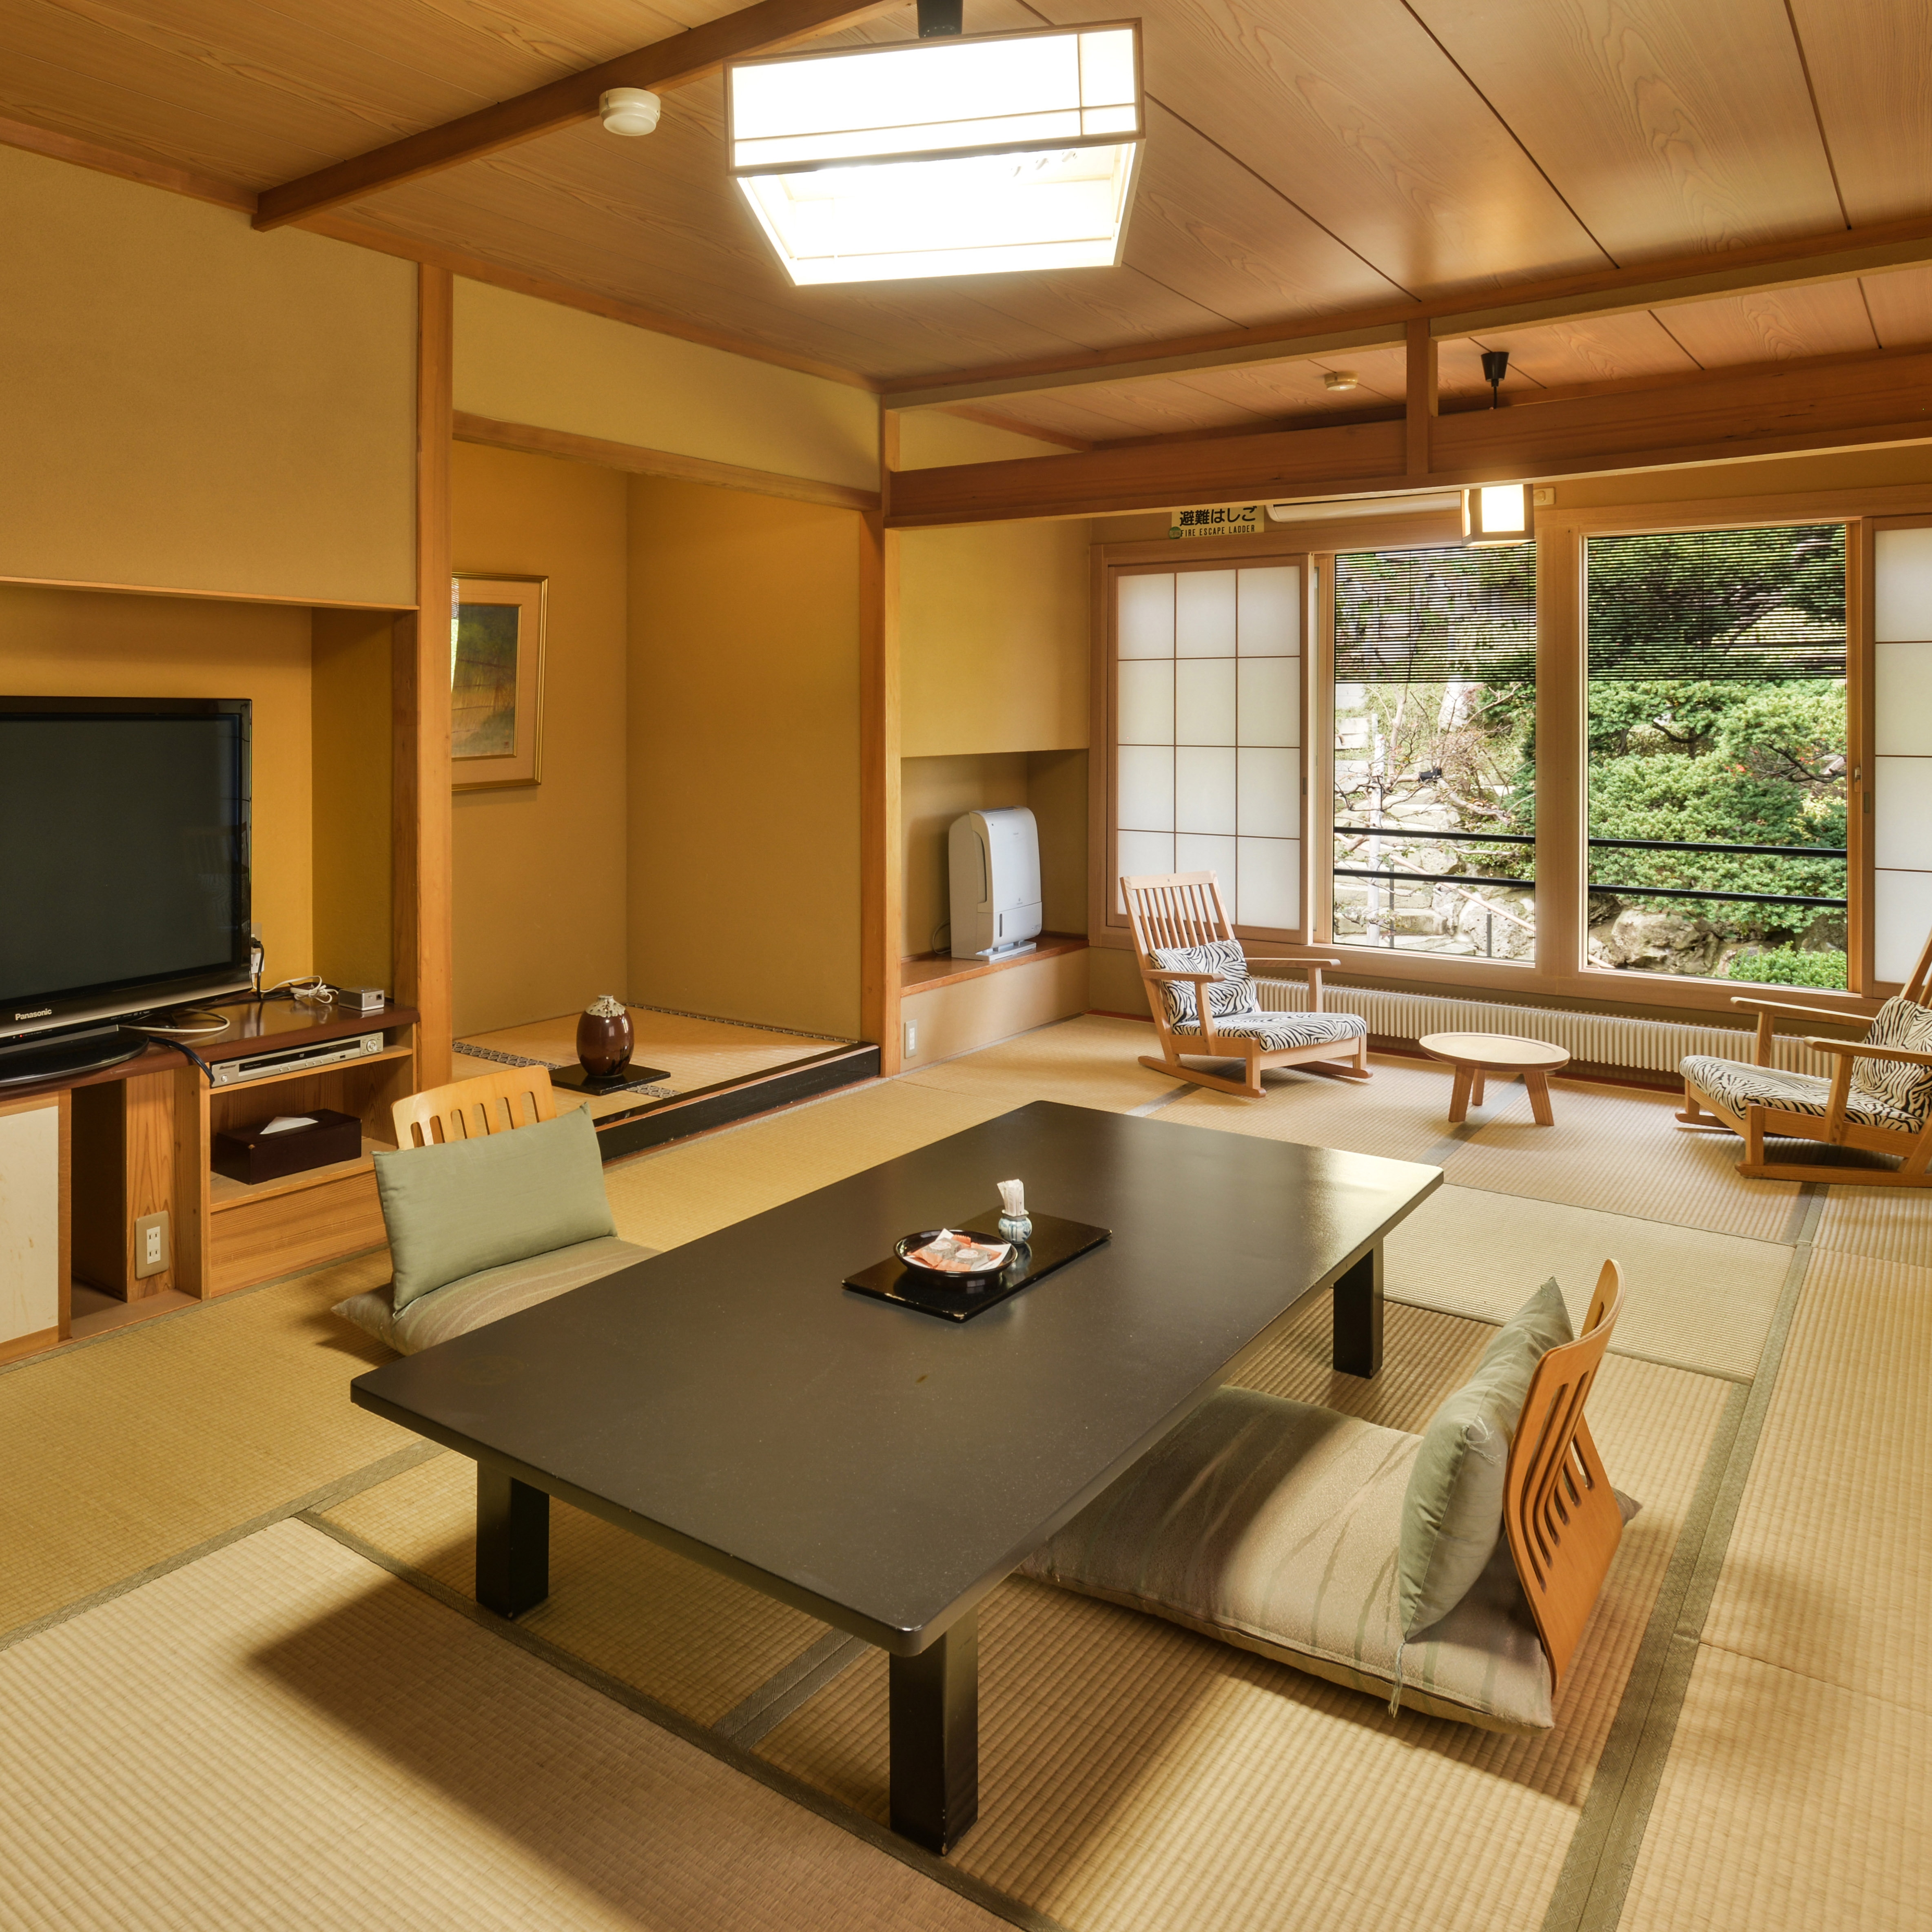 [Example of Japanese-style room in the North Building]